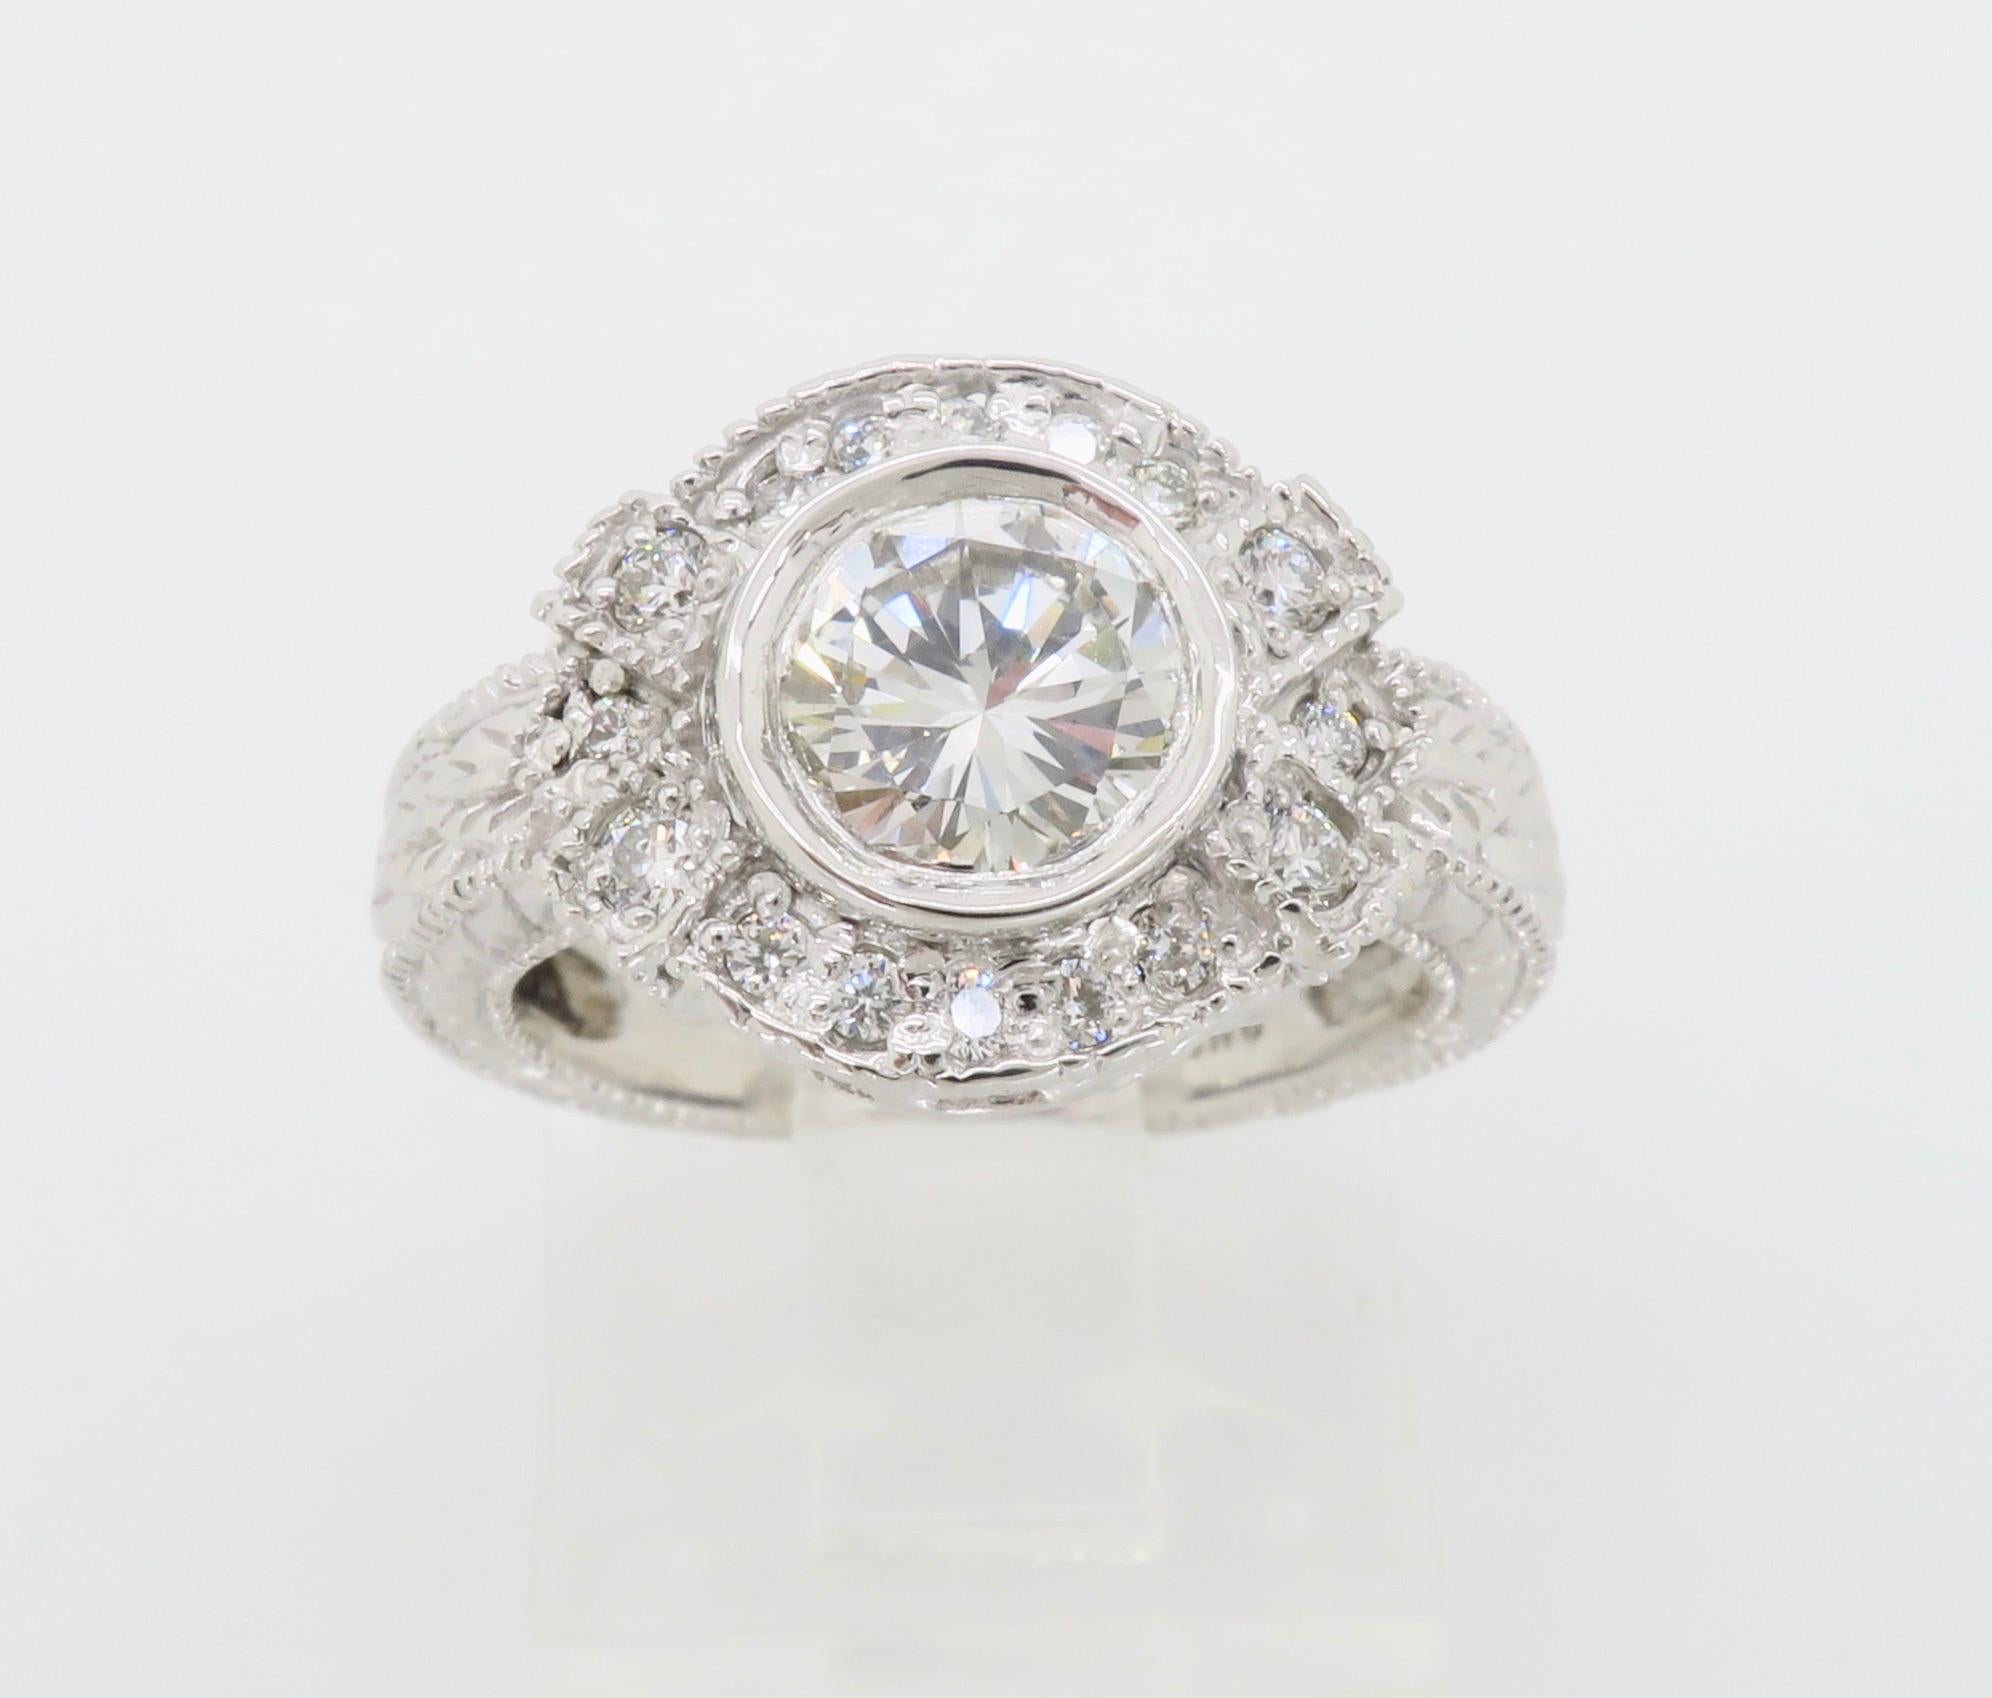 Vintage Inspired 1.27 Carat Diamond Ring Made in 14 Karat White Gold In New Condition For Sale In Webster, NY